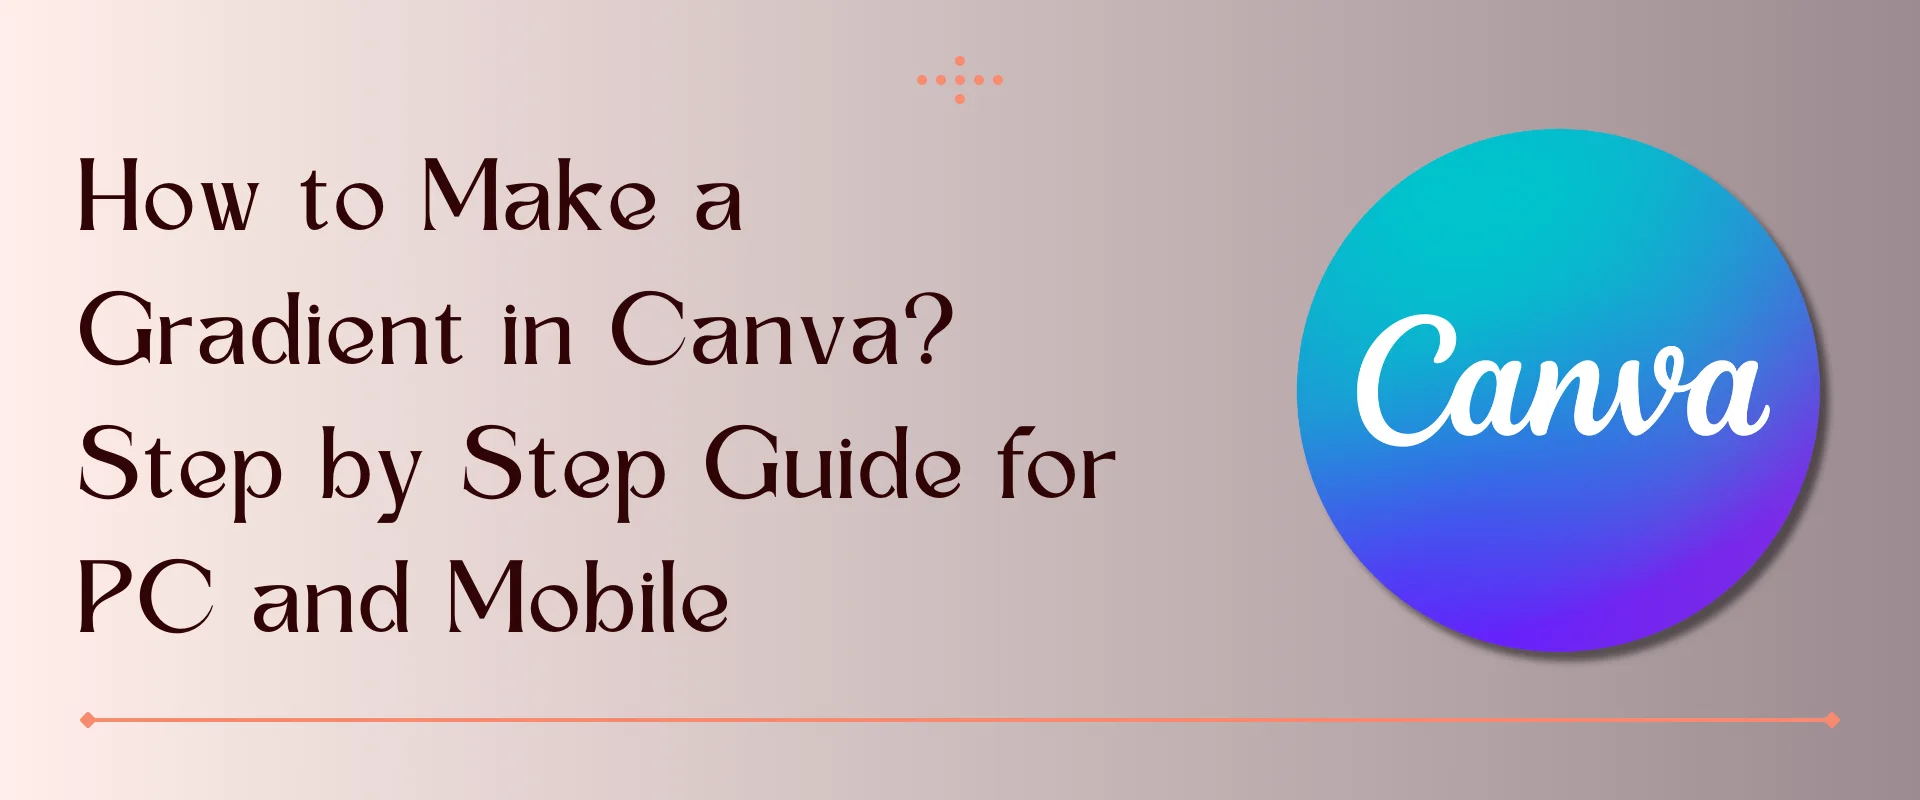 how to make a gradient in canva